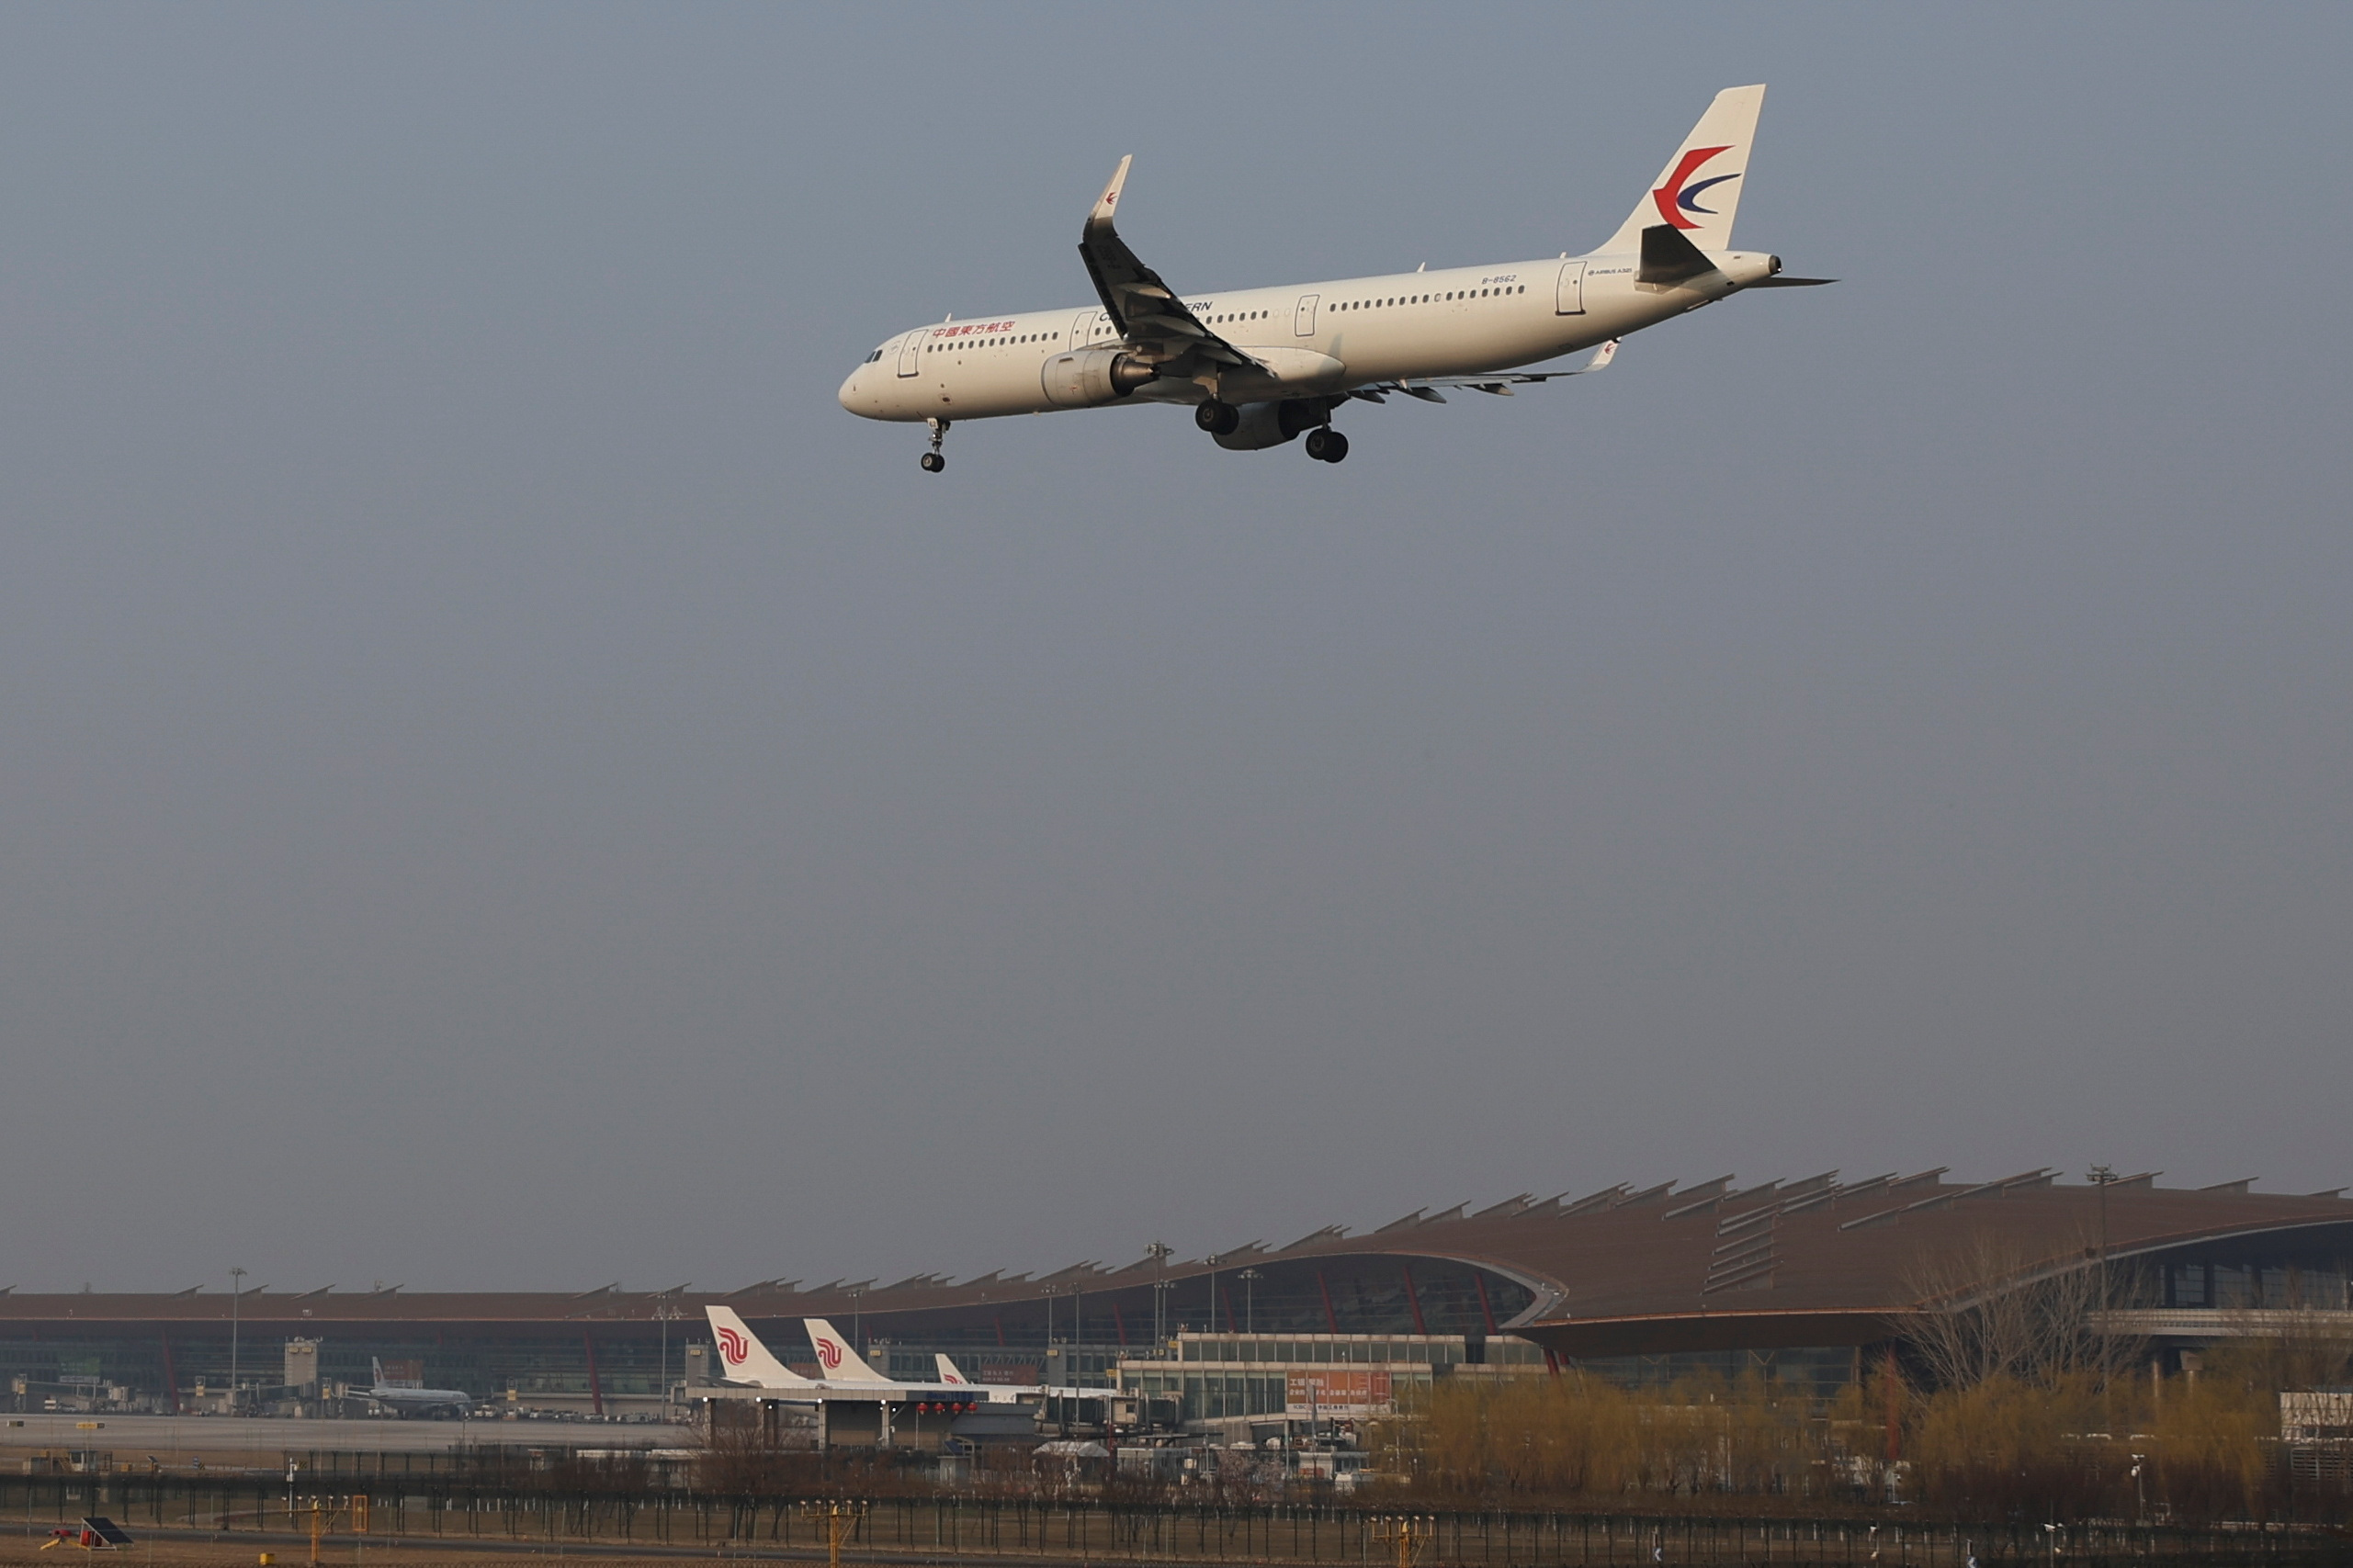 Plane of China Eastern Airlines lands at the Beijing Capital International Airport in Beijing